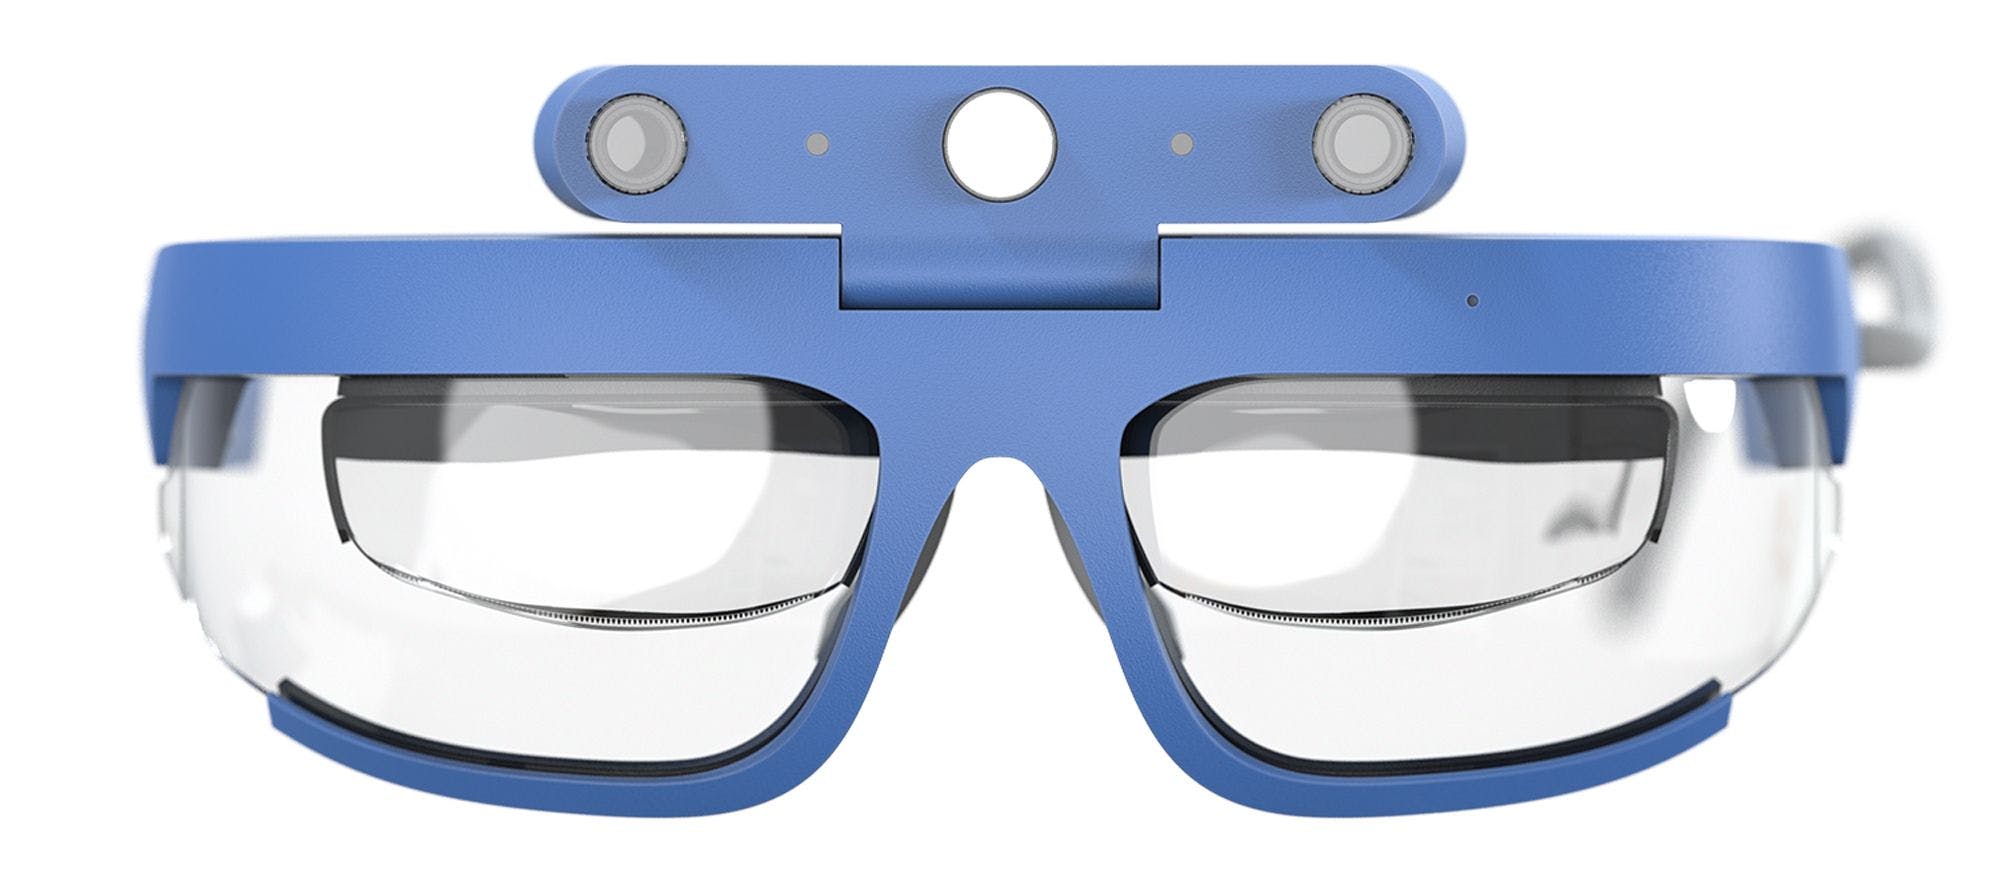 NuEyes to Launch Augmented Reality Smart Glasses NuLoupes | Image Credit: NuEyes